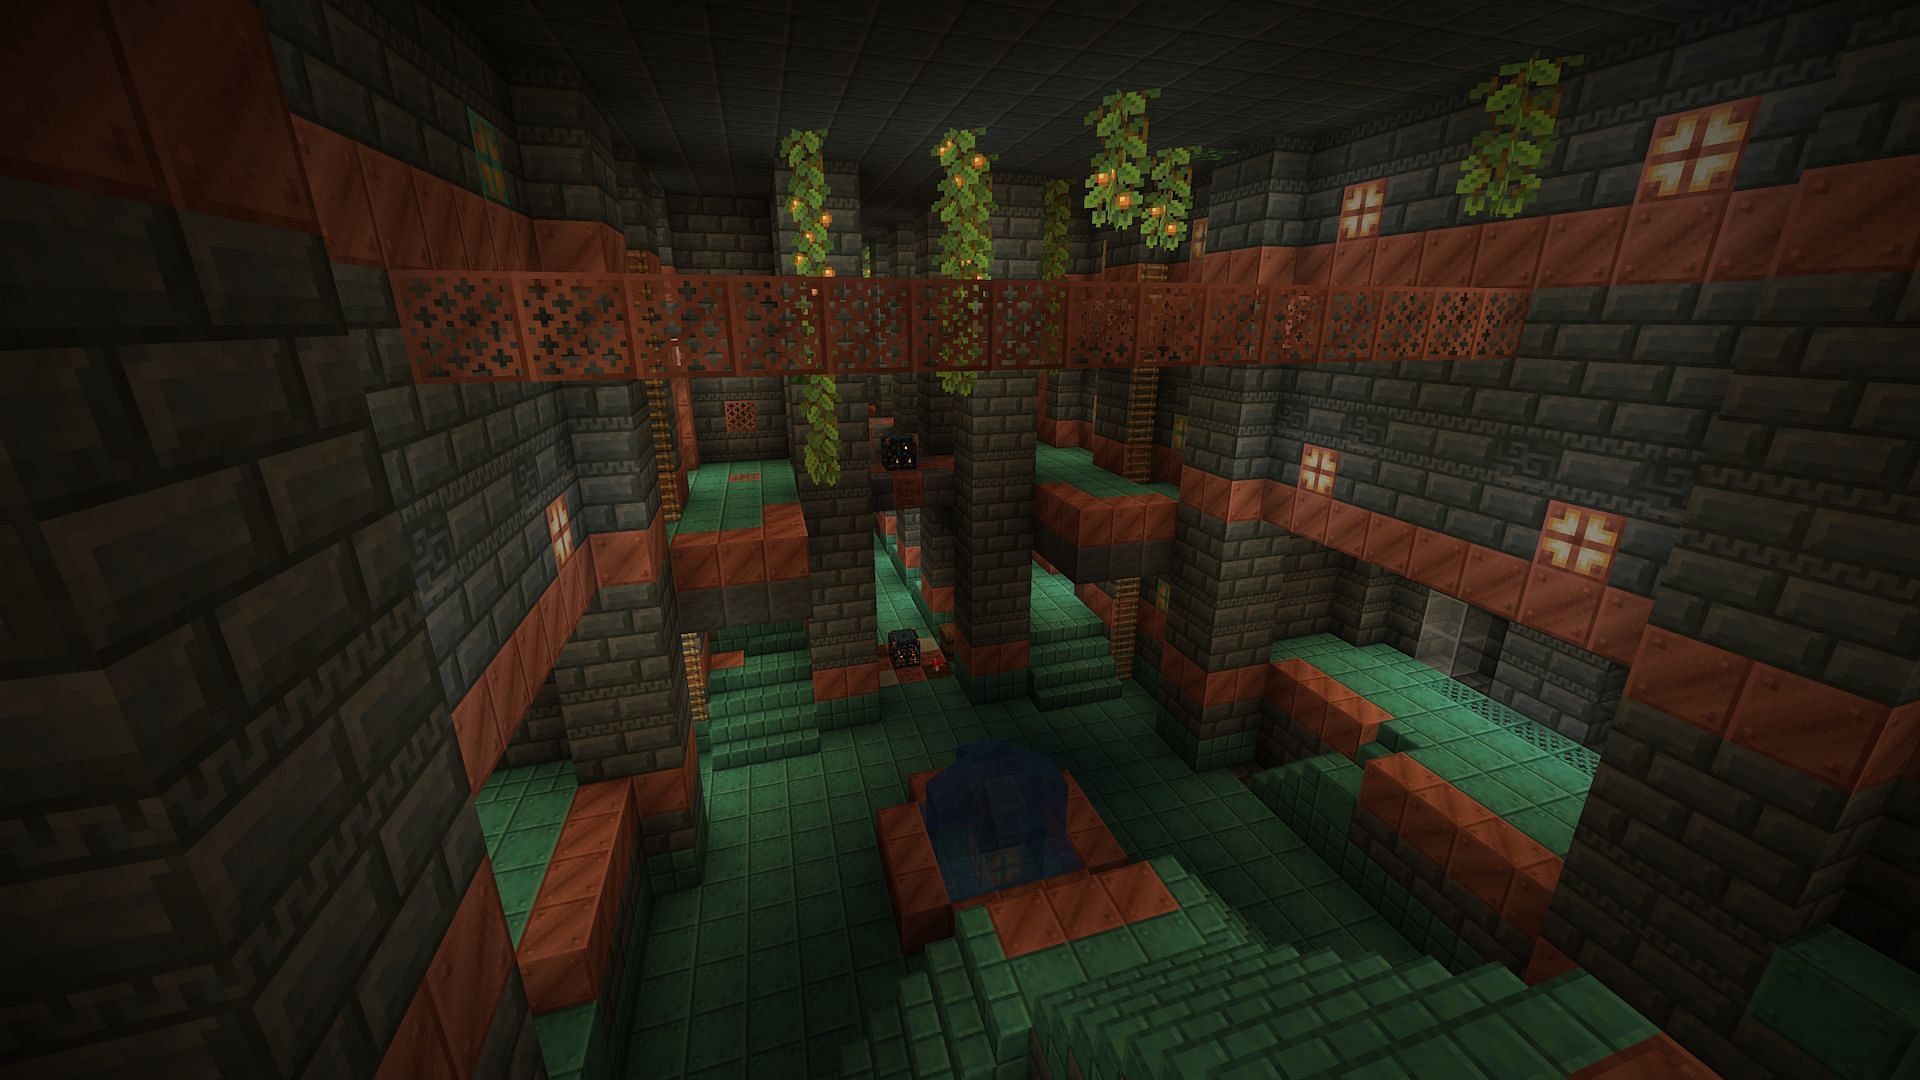 Trial chambers are the newest most dangerous structure (Image via Mojang)